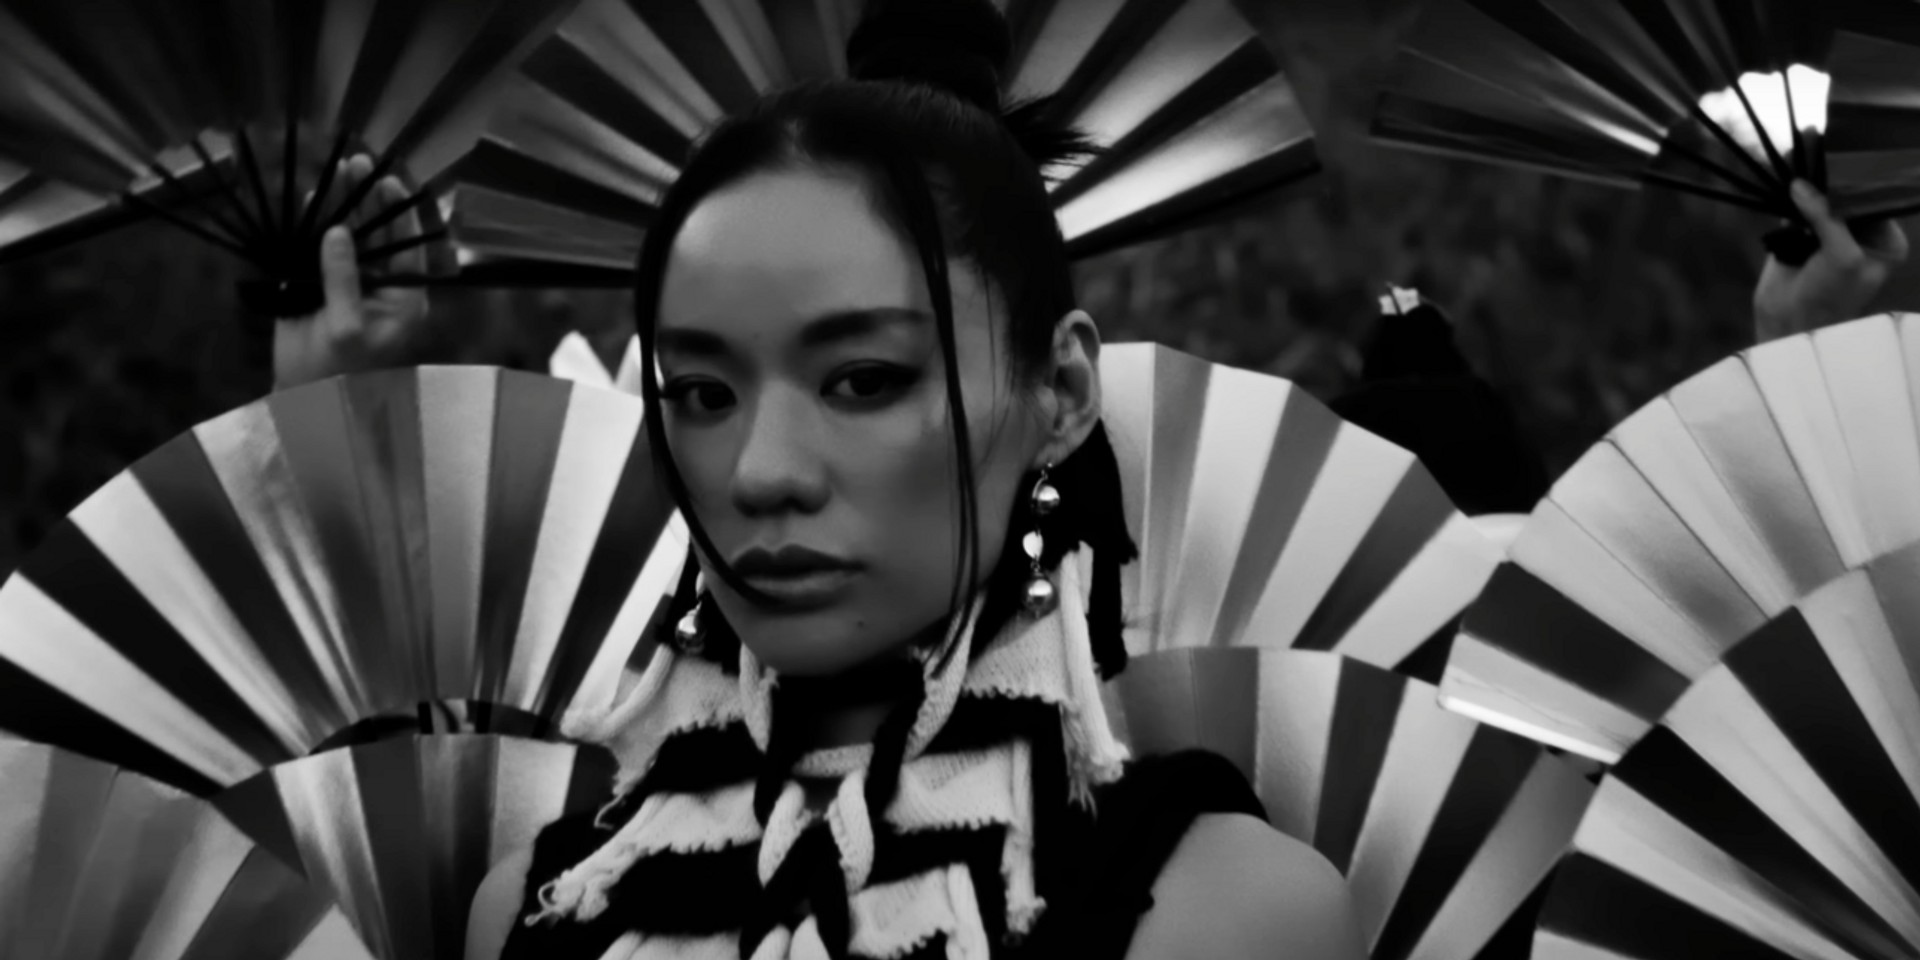 Awich pays homage to Okinawa in music video for 'The Union